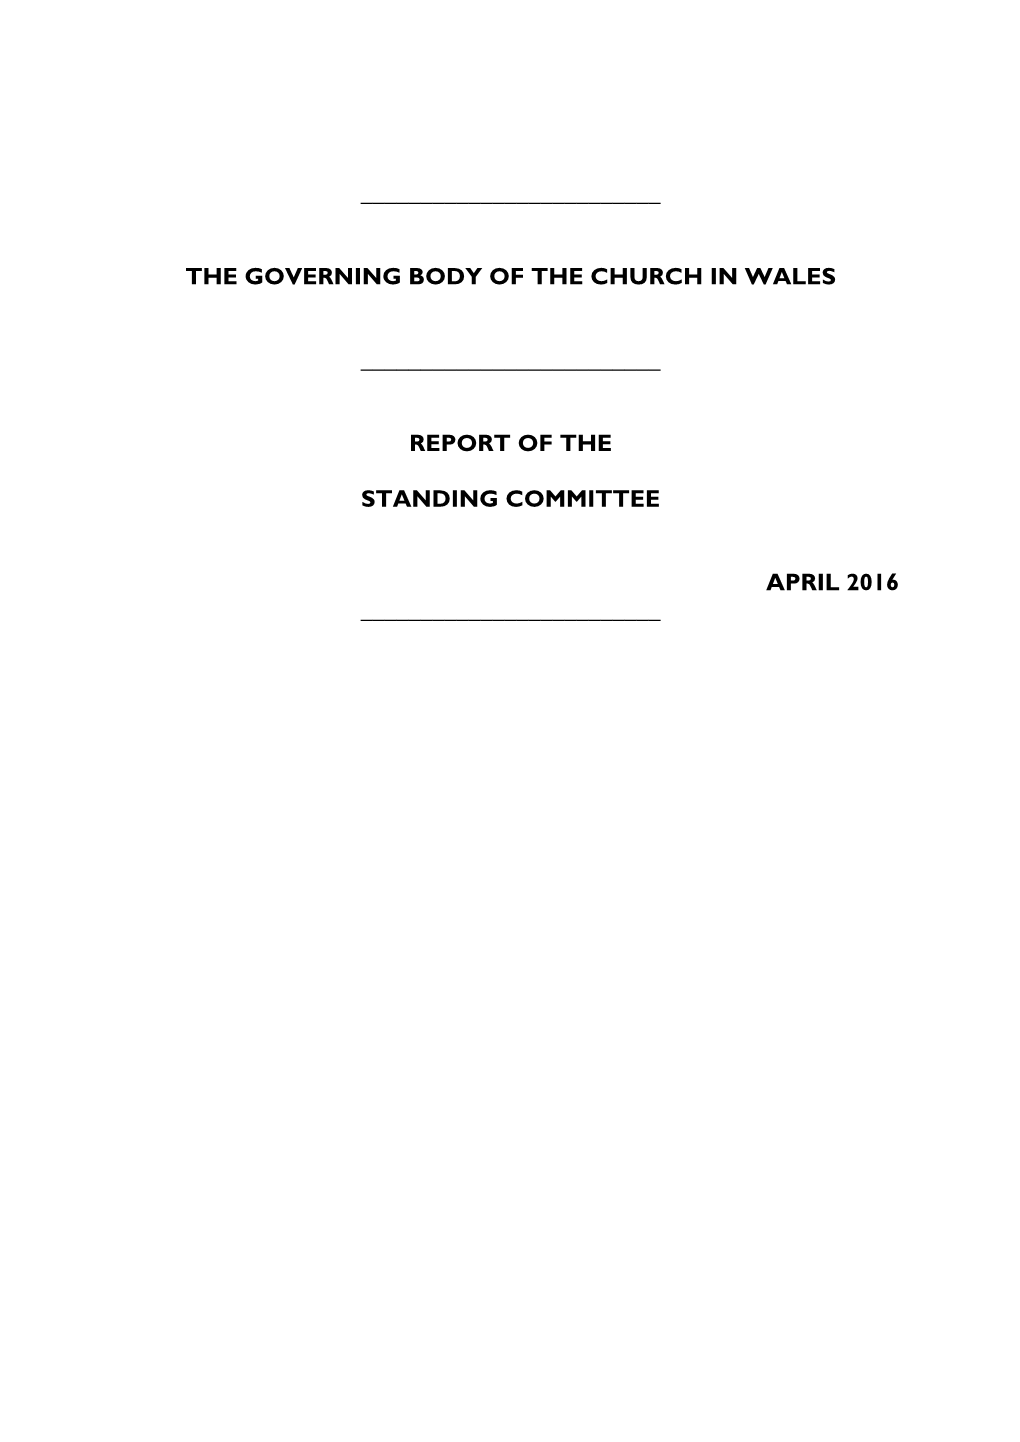 The Governing Body of the Church in Wales